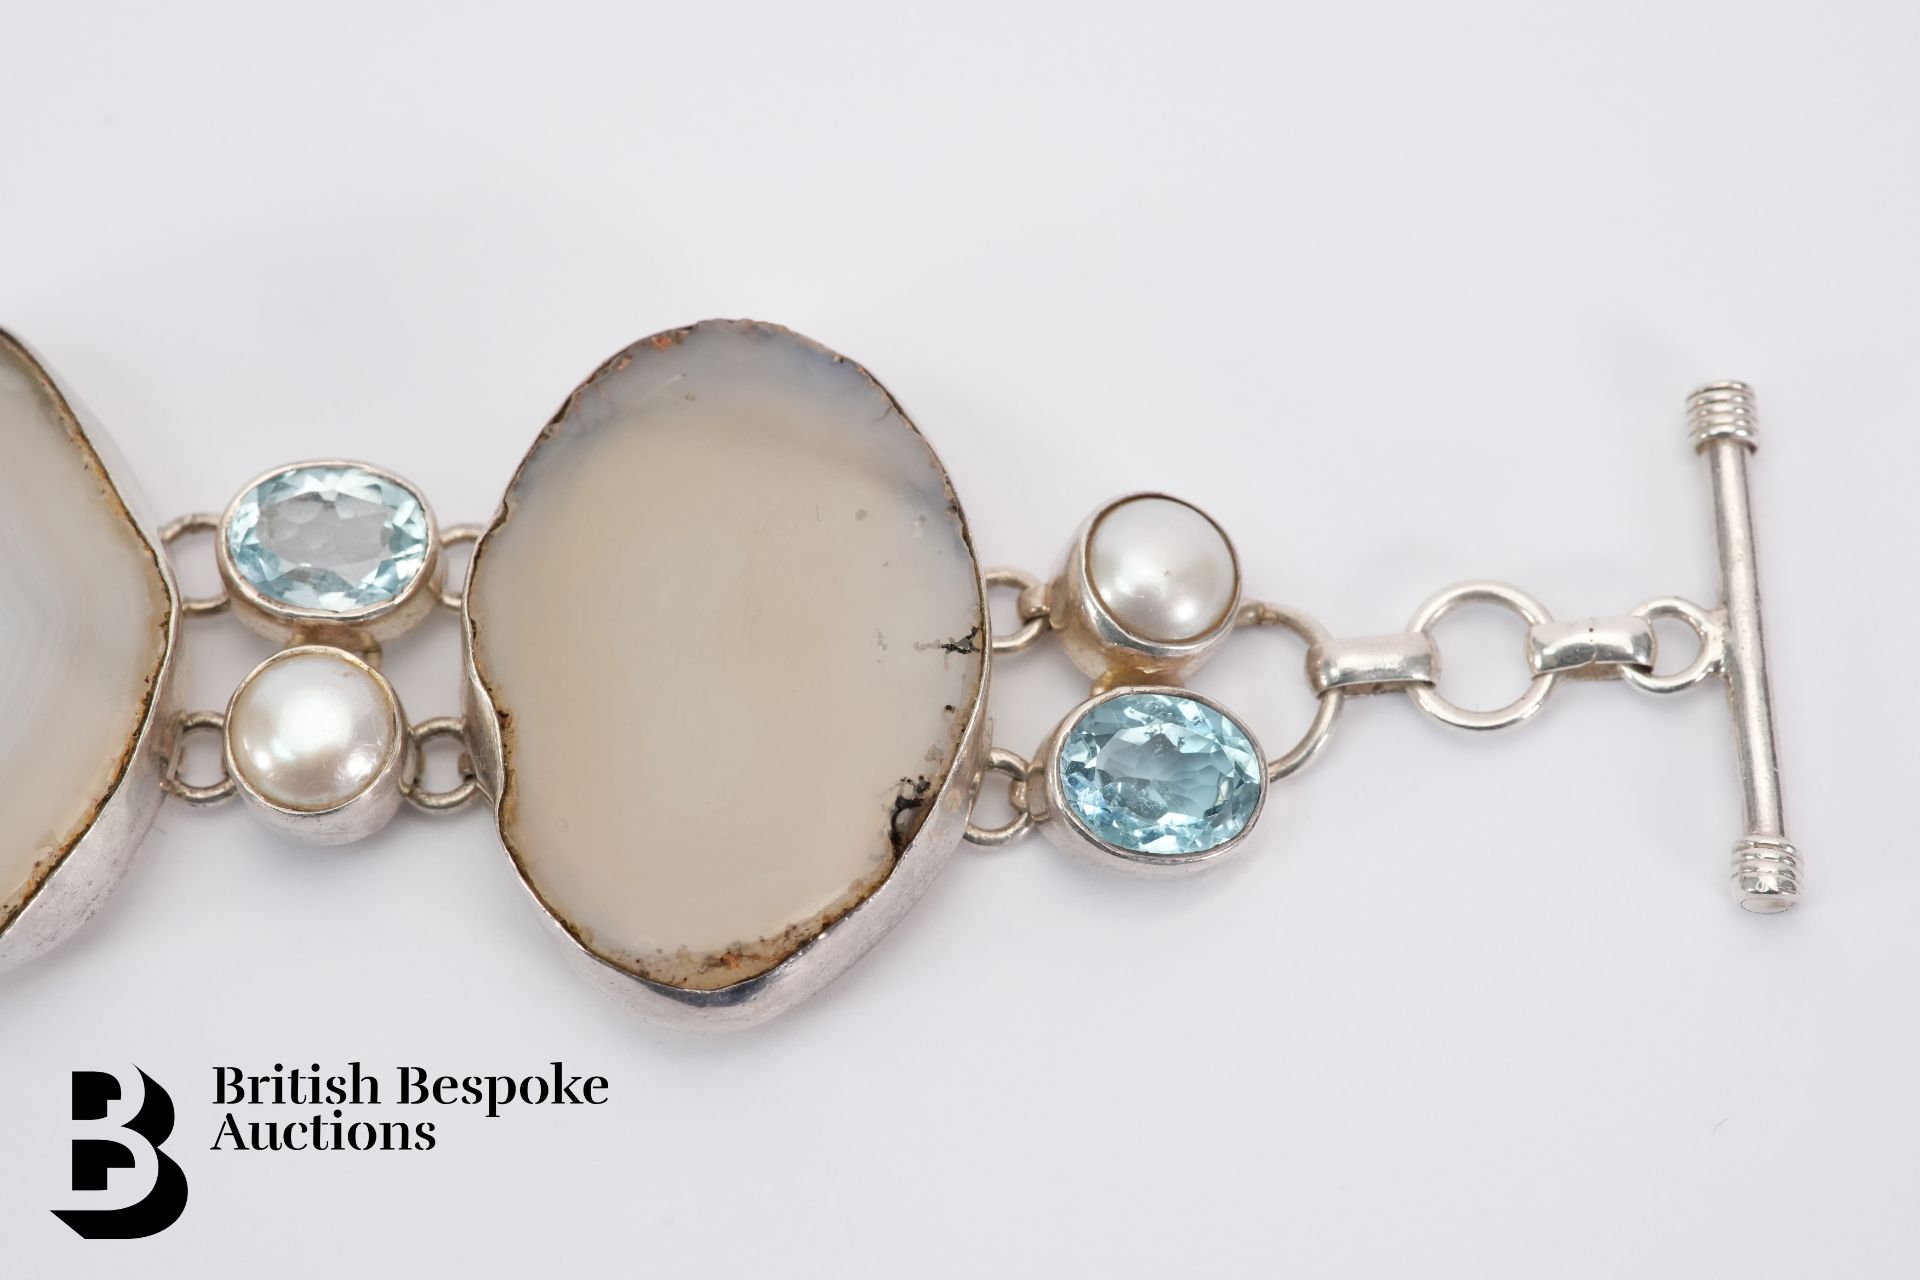 Silver and Agate Bracelet - Image 4 of 4